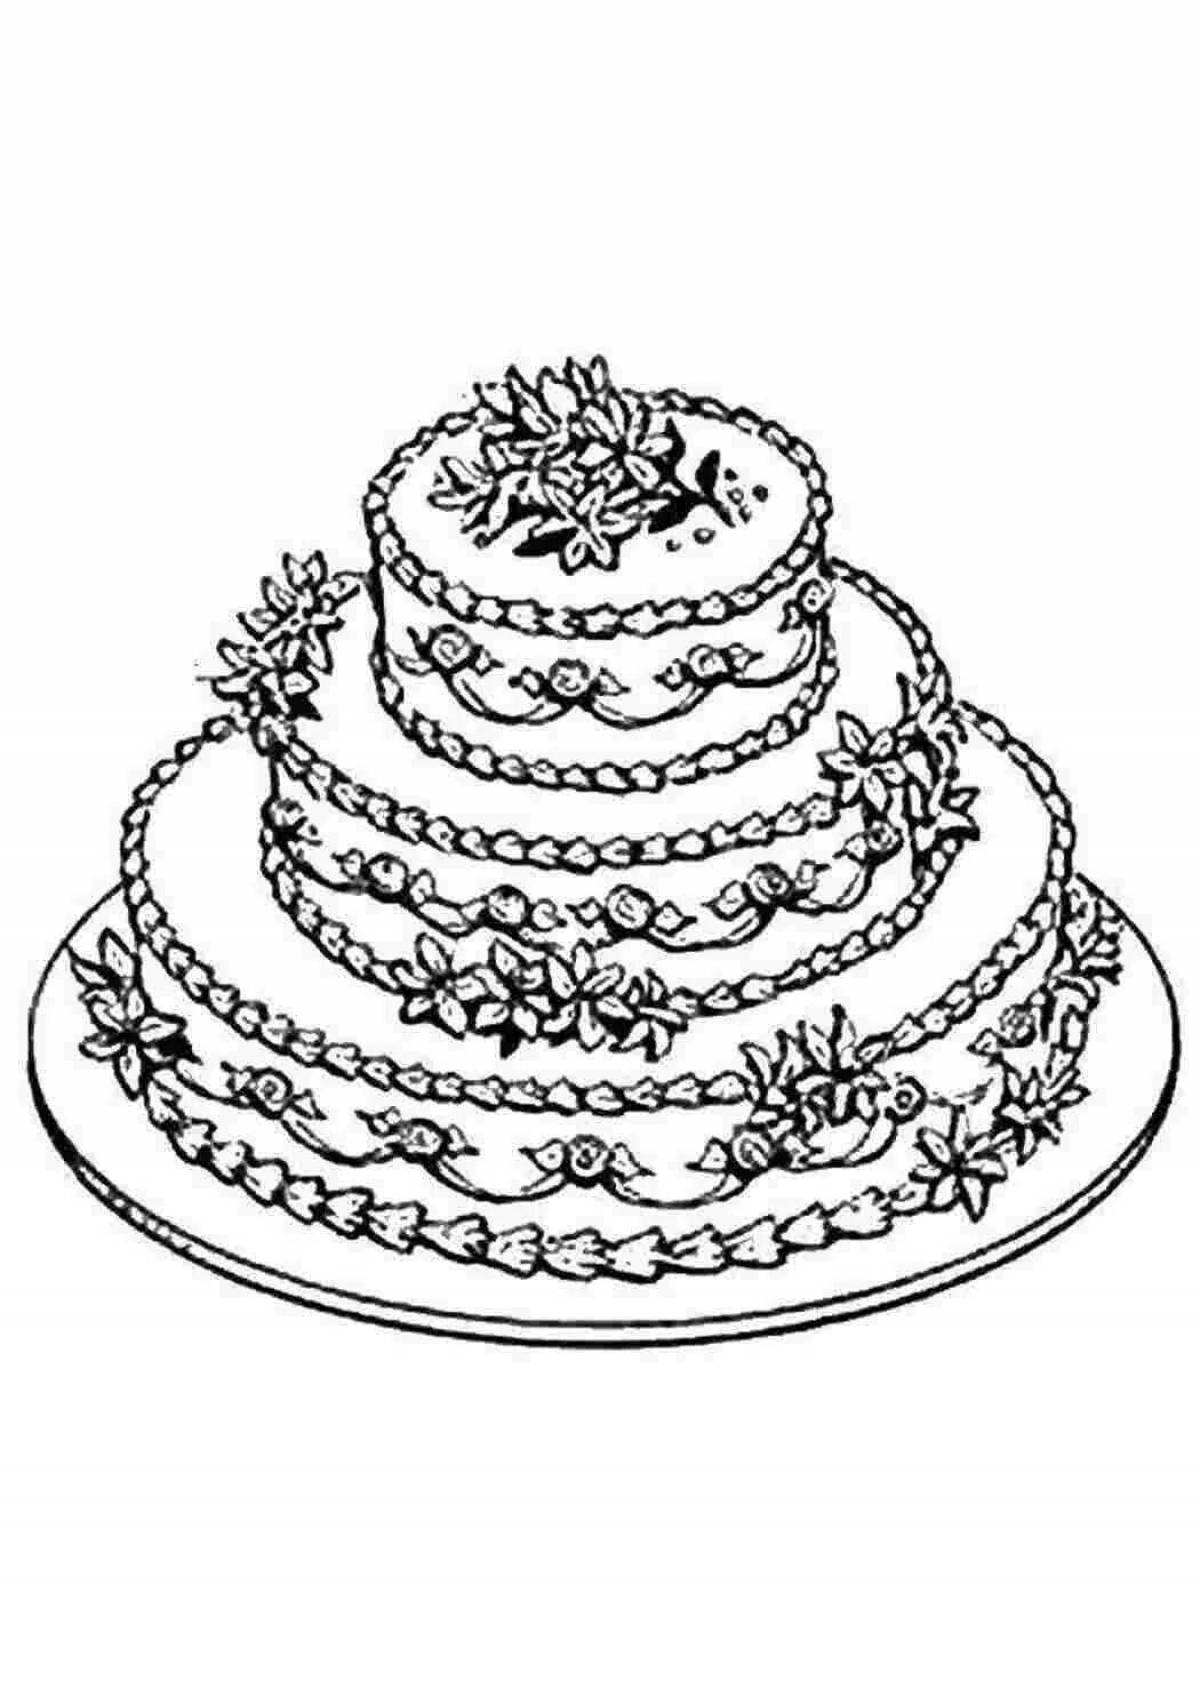 Coloring page chocolate cake with fruit filling